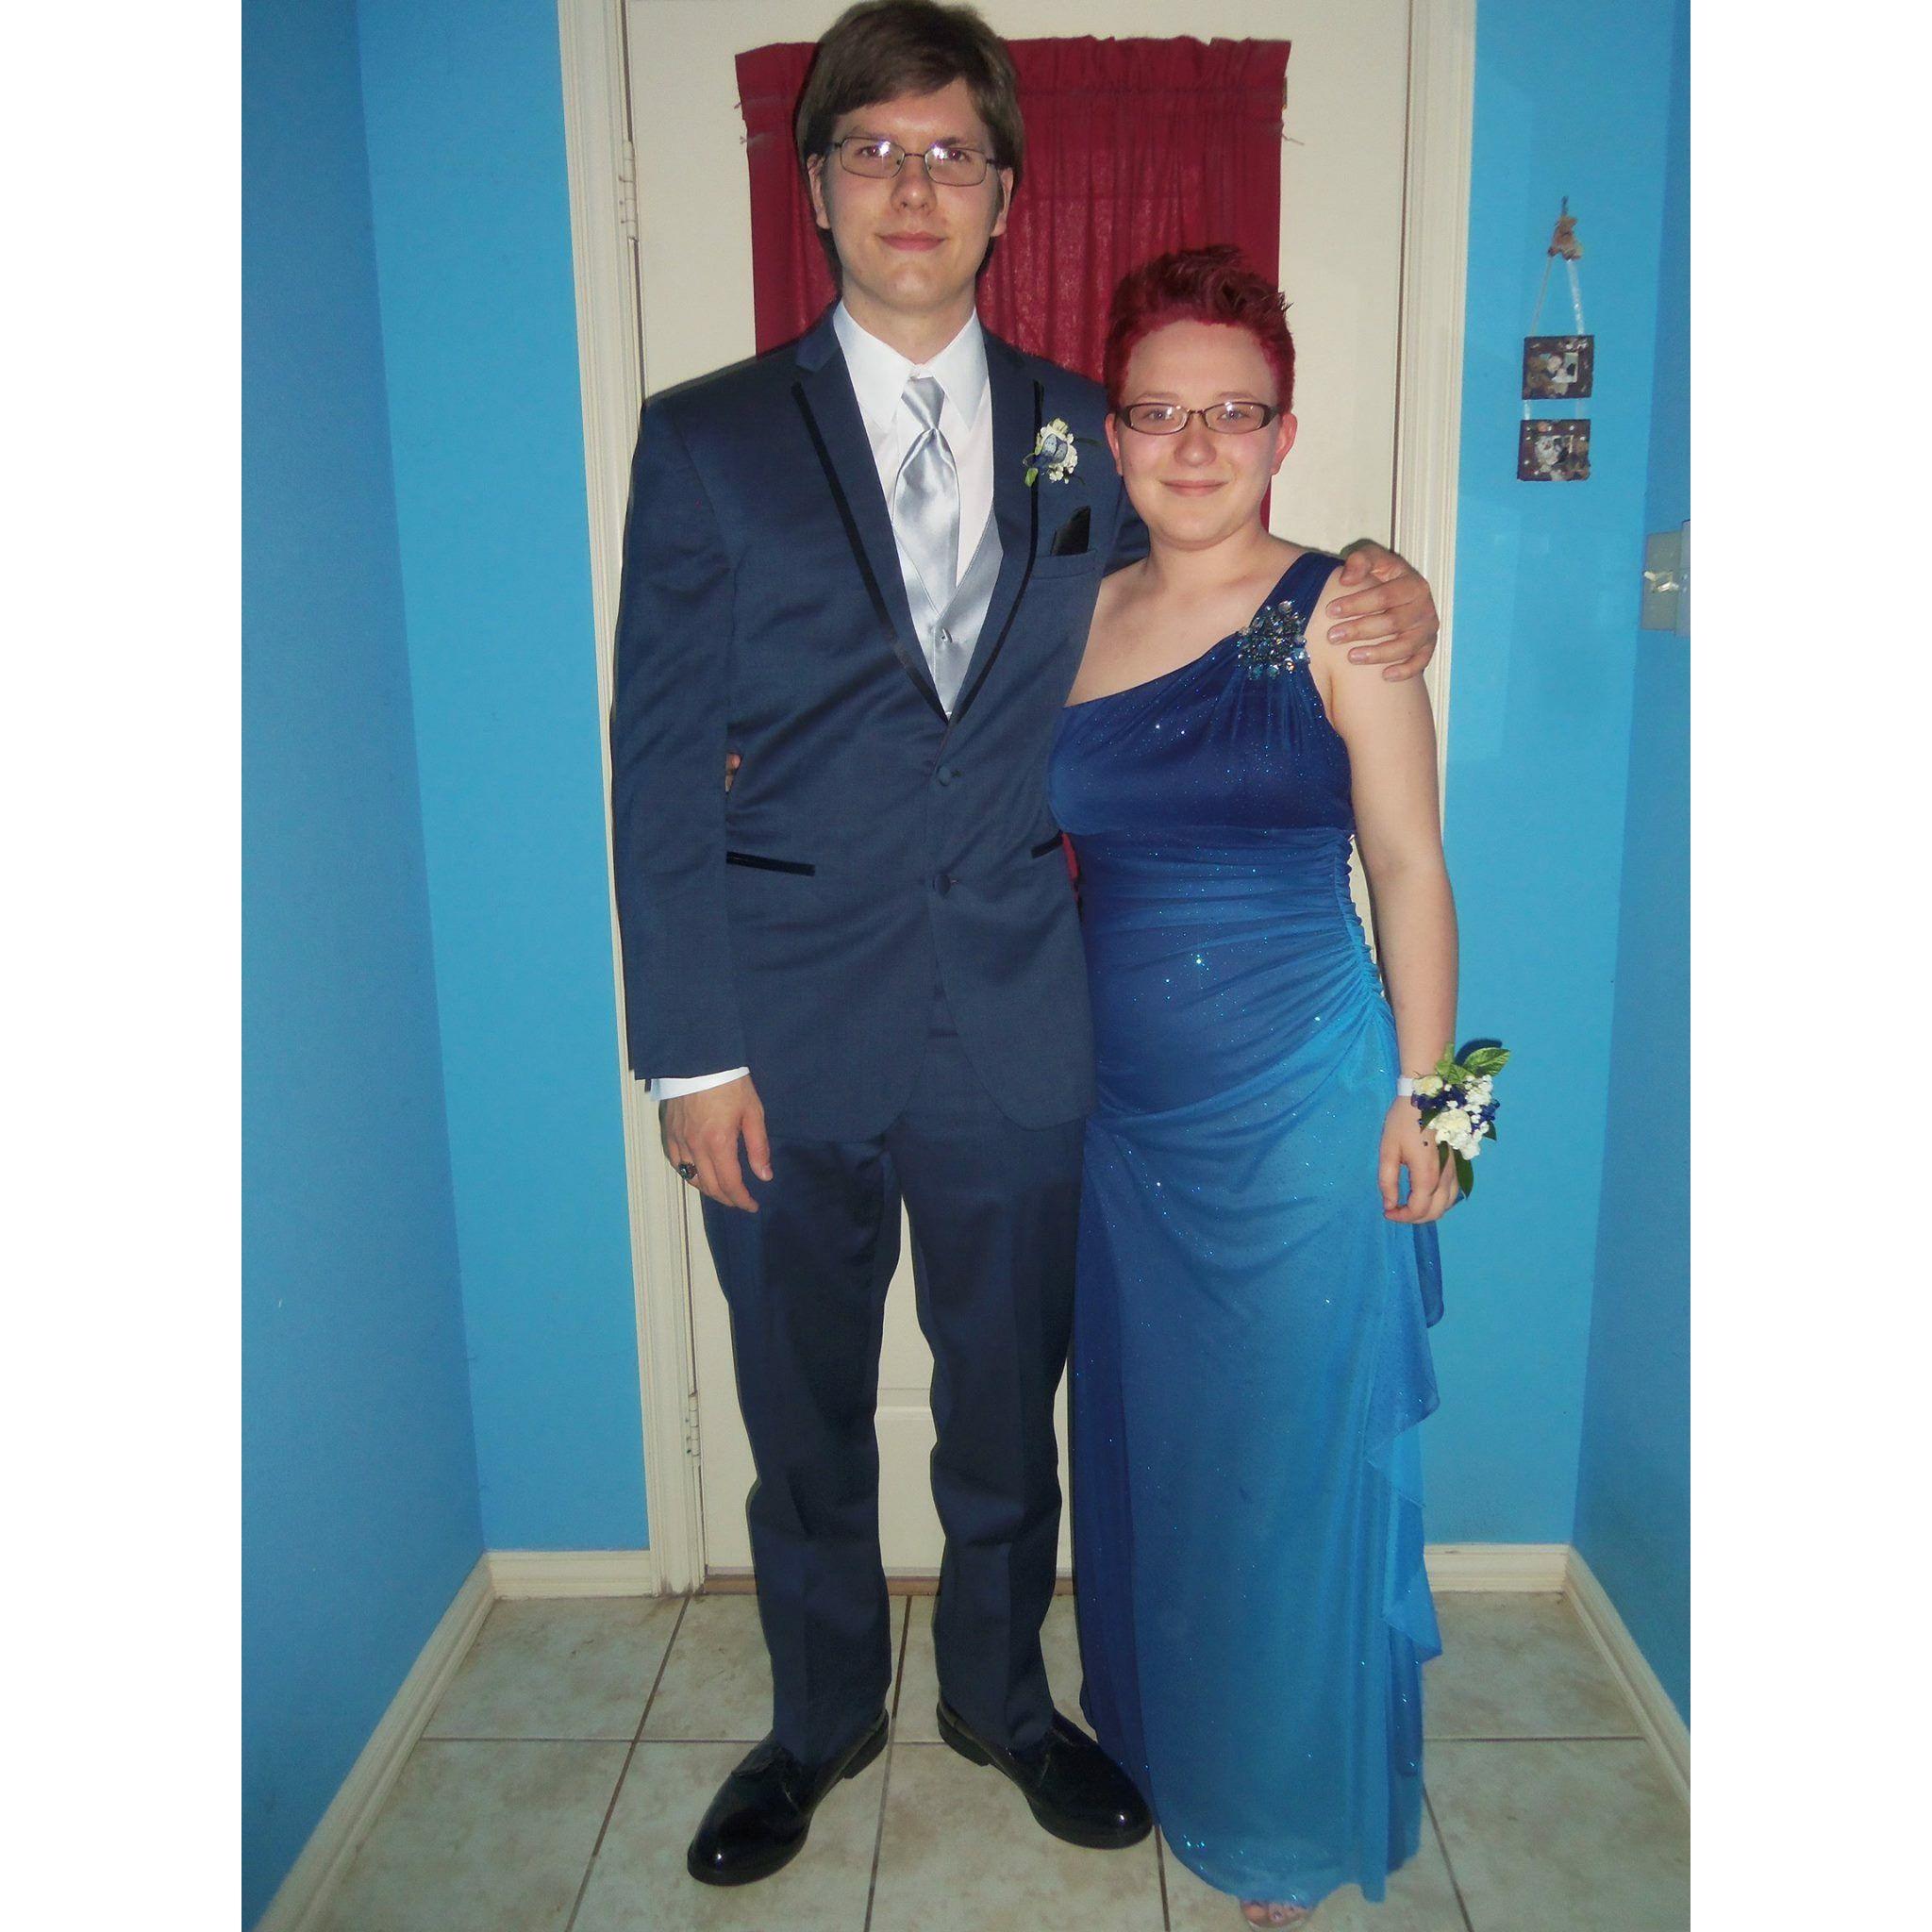 We were prom dates in 2015, too!